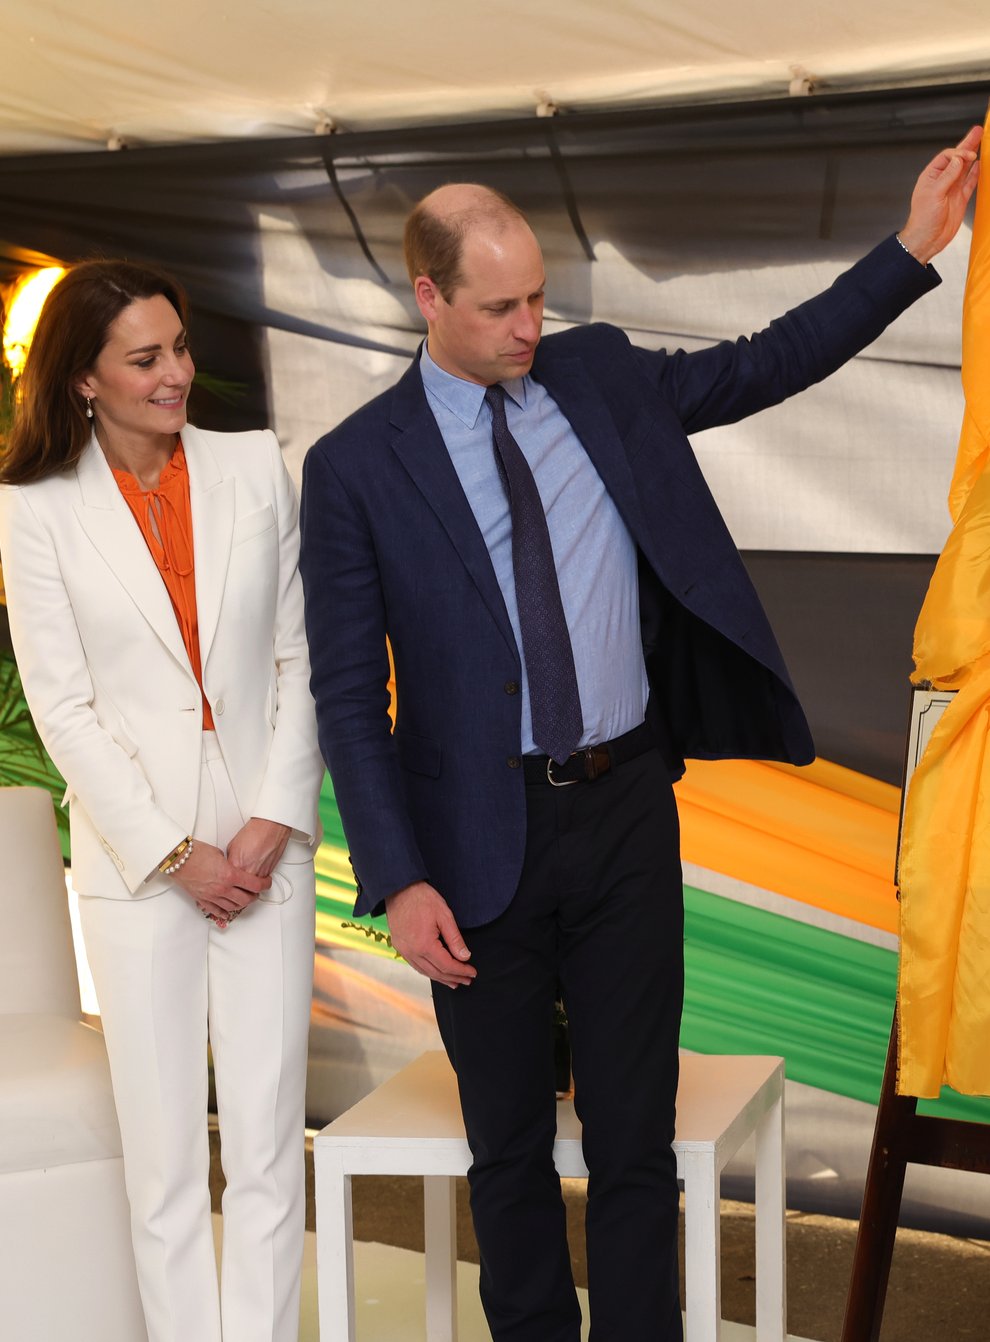 The Duchess of Cambridge forced her husband off the road – in the name of testing his driving skills on a simulator (Chris Jackson/PA)